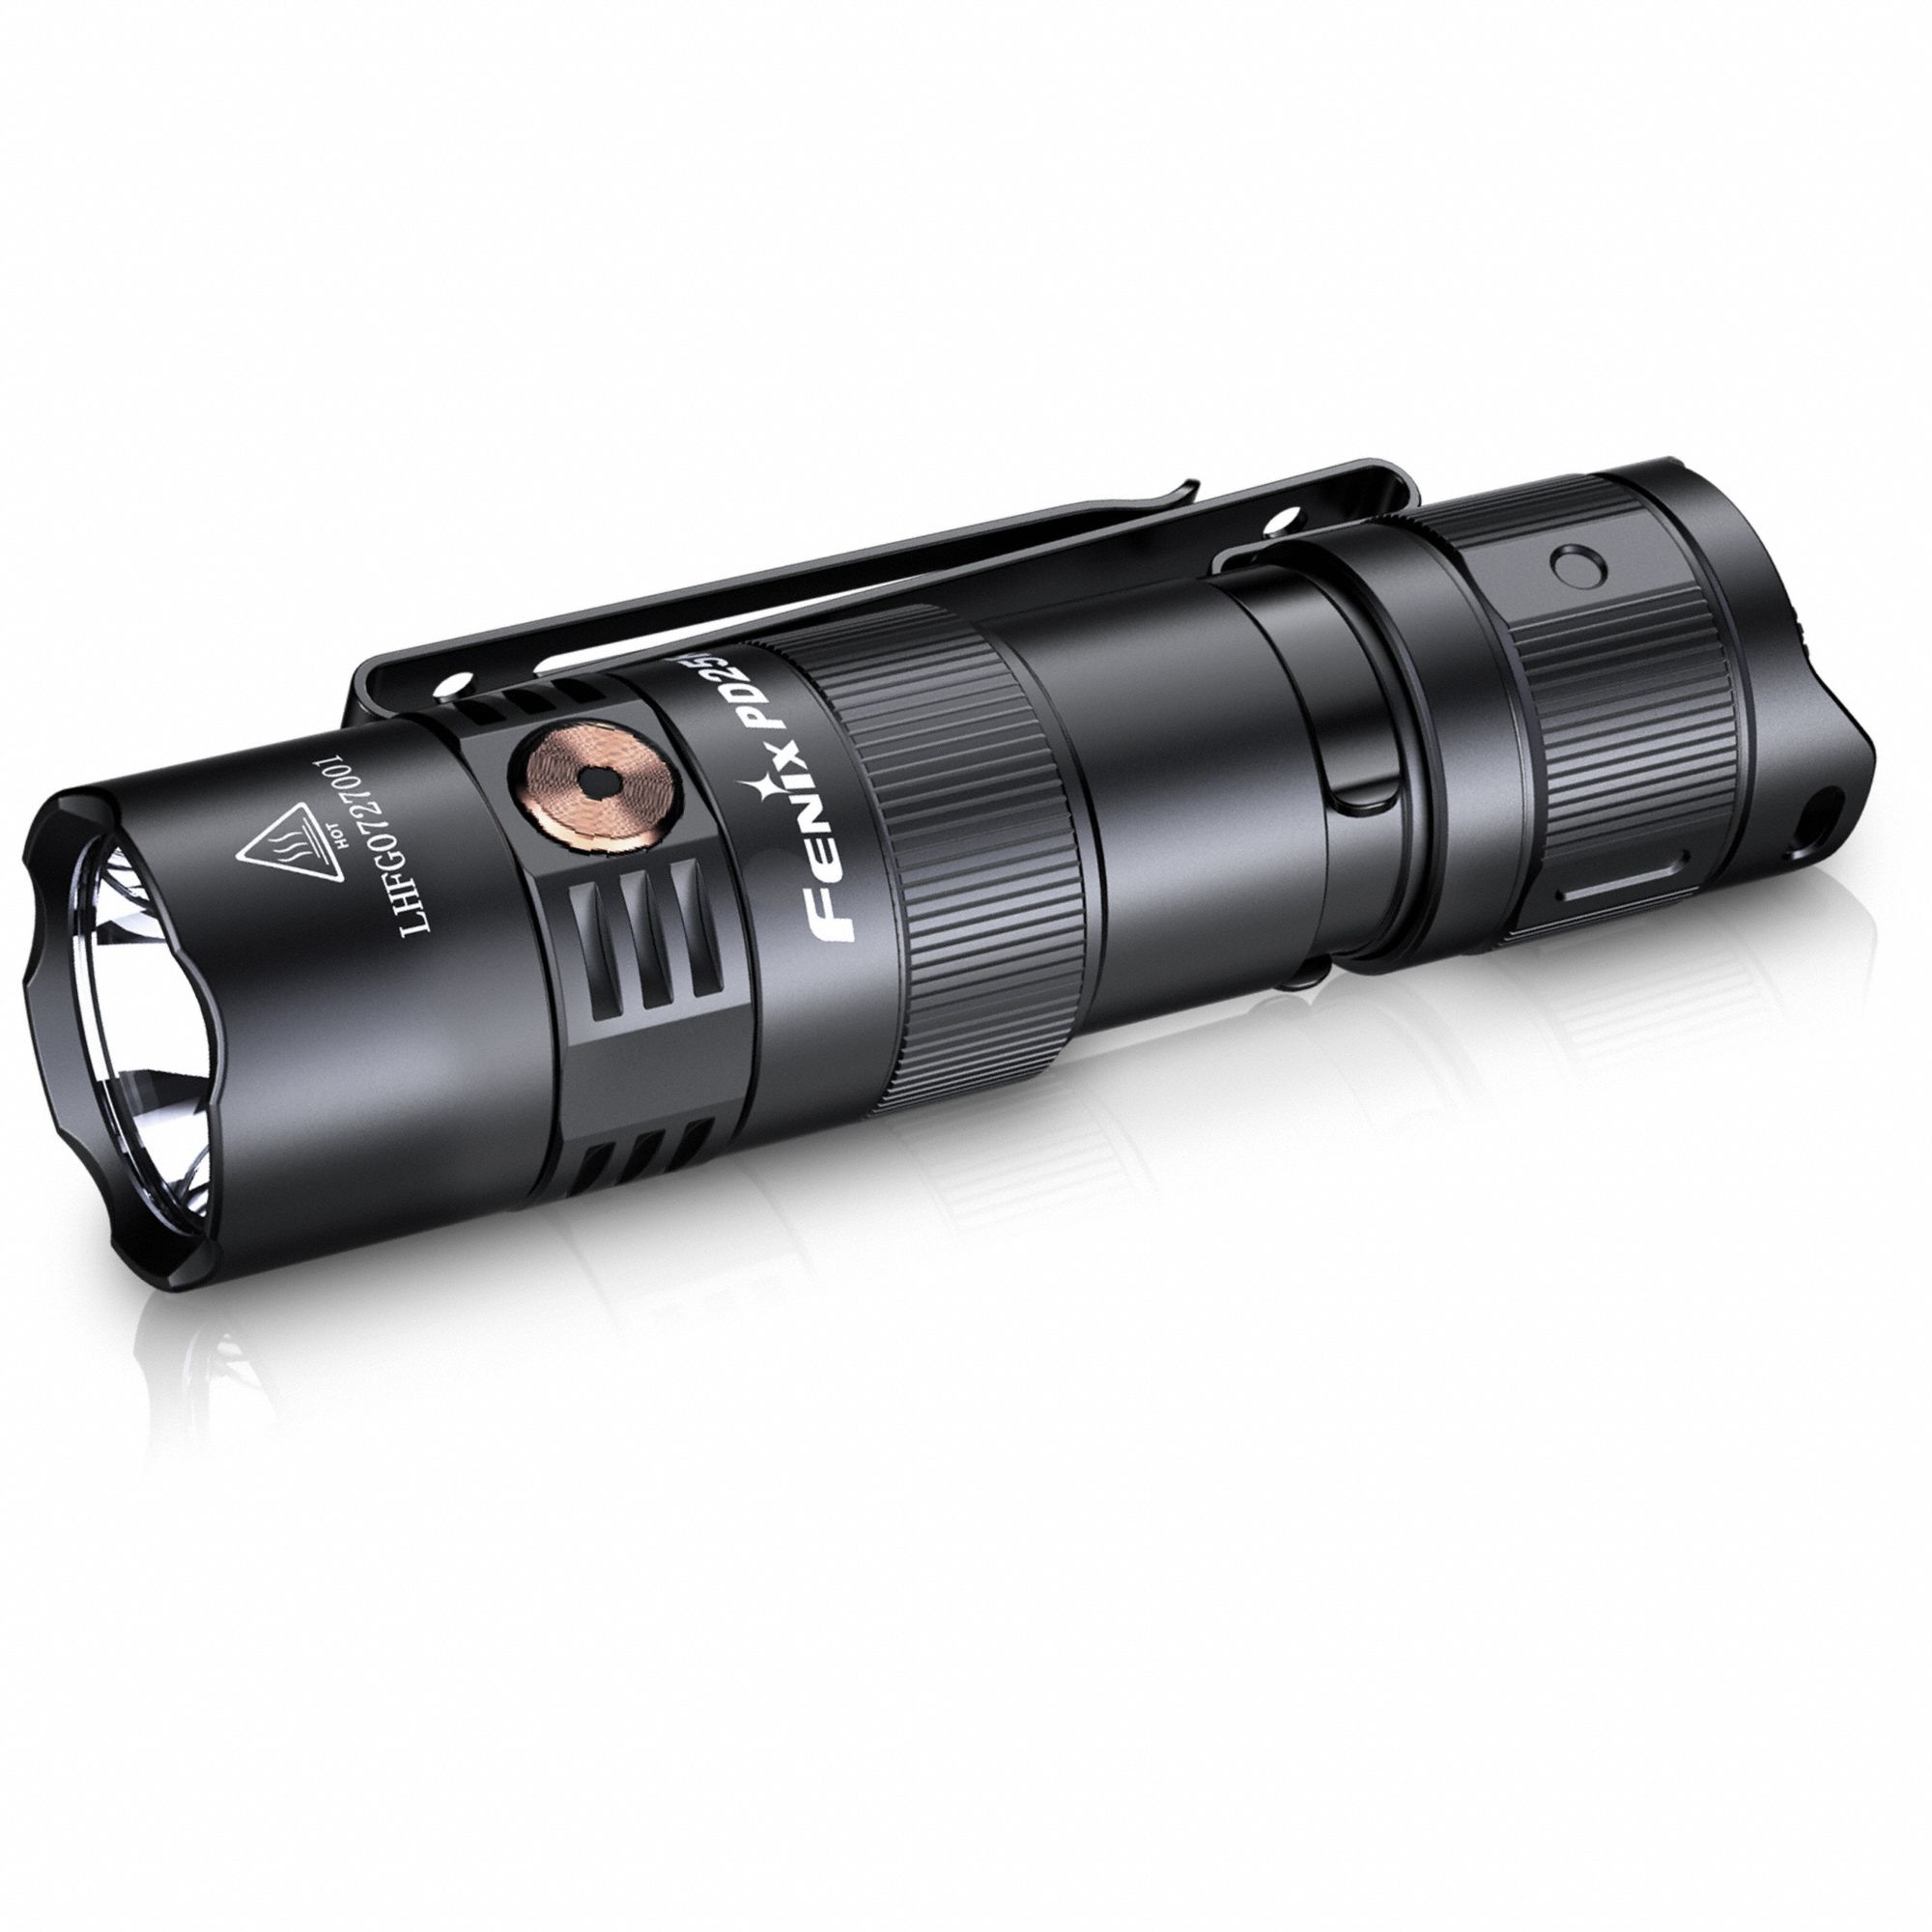 Rechargeable Flashlight: Rechargeable, 800 lm Max Brightness, 250 m Max Beam Distance